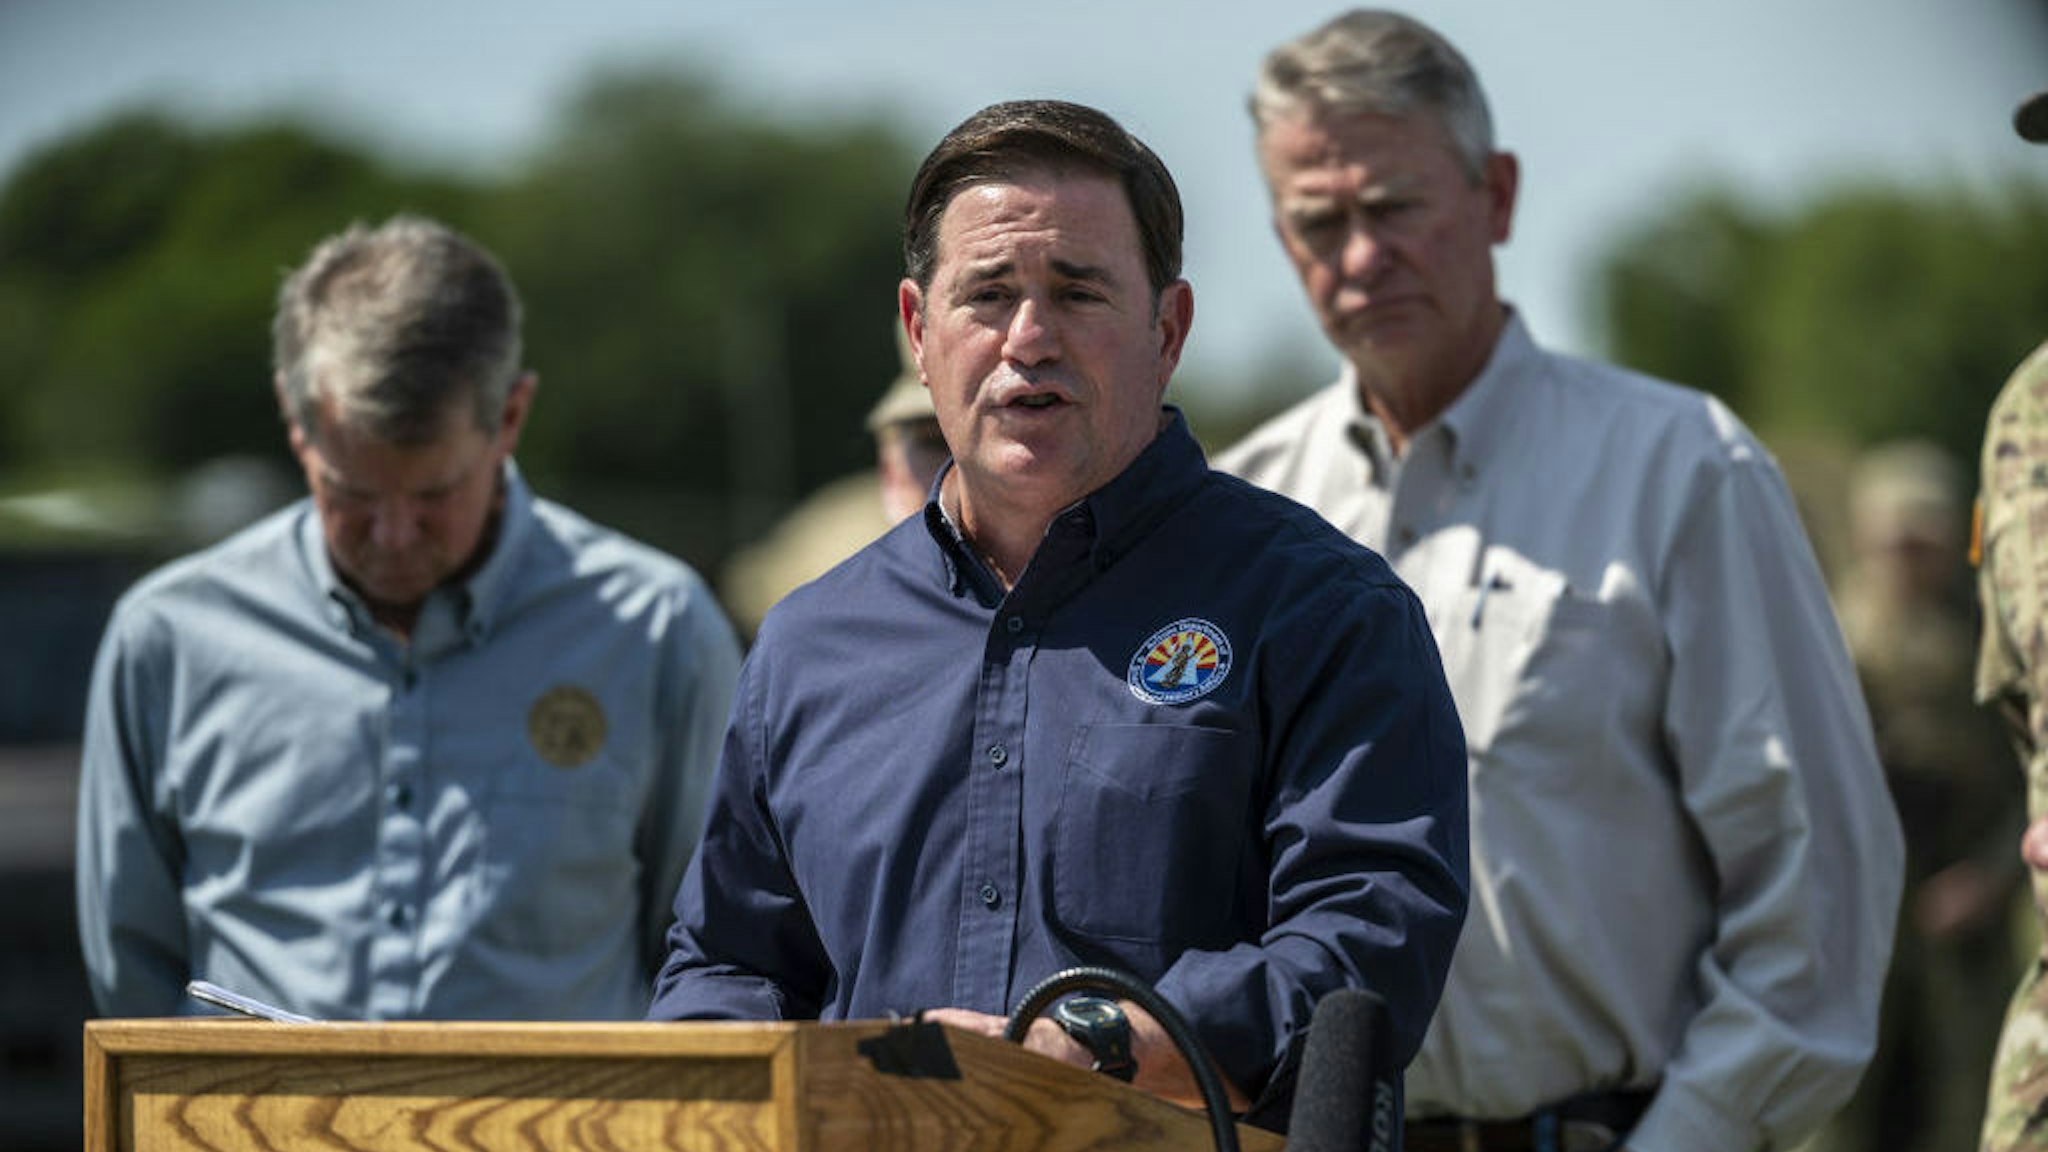 Doug Ducey, governor of Arizona, speaks during a news conference in Mission, Texas, U.S., on Wednesday, Oct. 6, 2021. Texas Governor Abbott and Republican state chief executives from around the nation gathered at the border to again call attention to unauthorized immigration across the Rio Grande. Photographer: Sergio Flores/Bloomberg